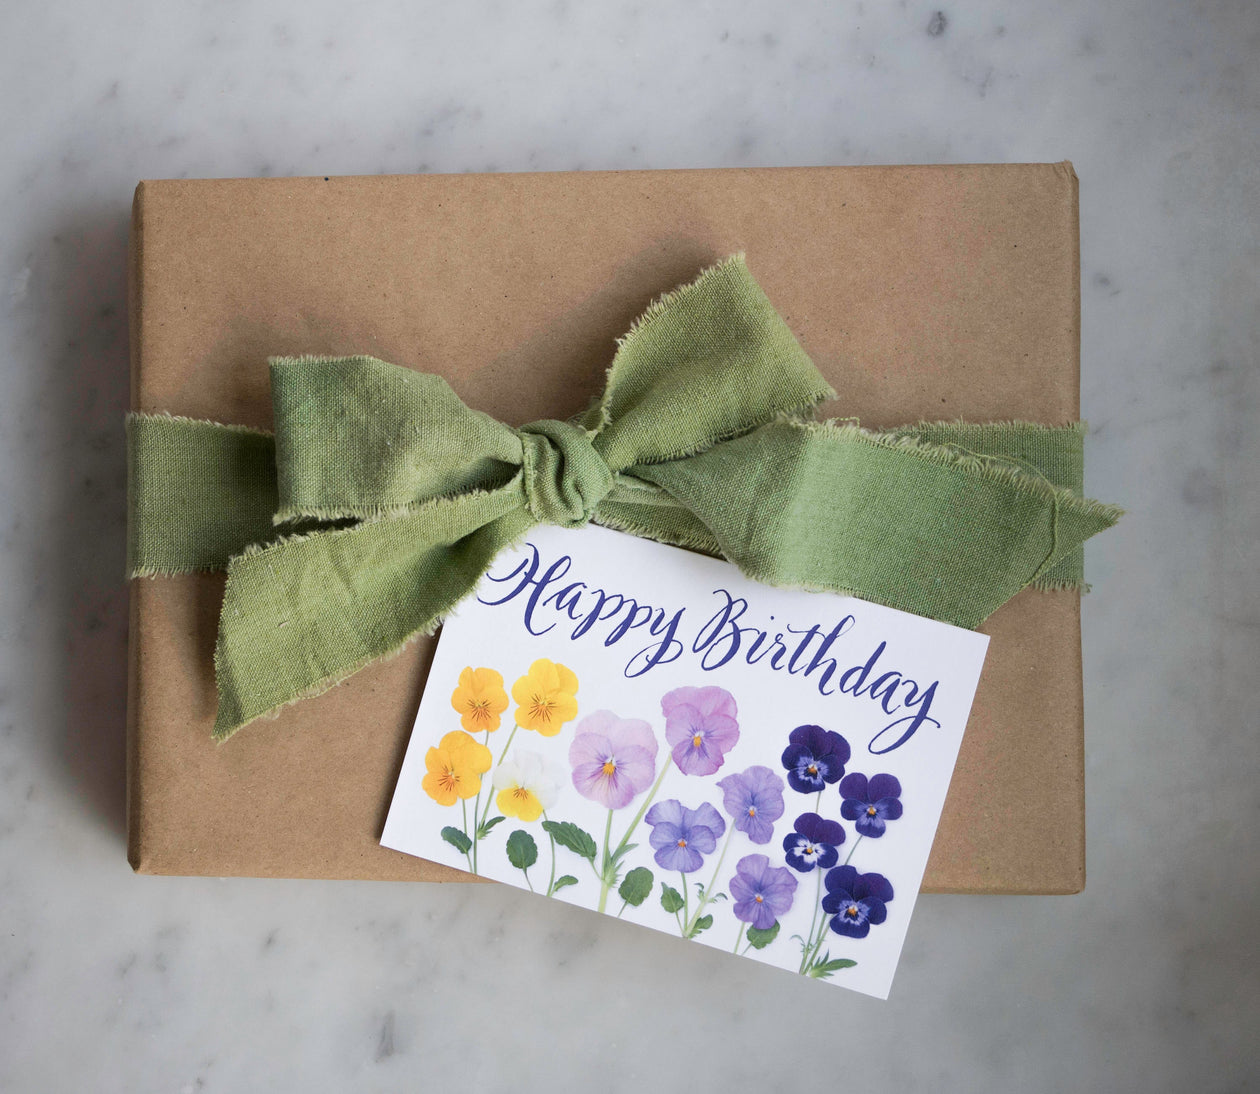 Birthday Card with Pansies